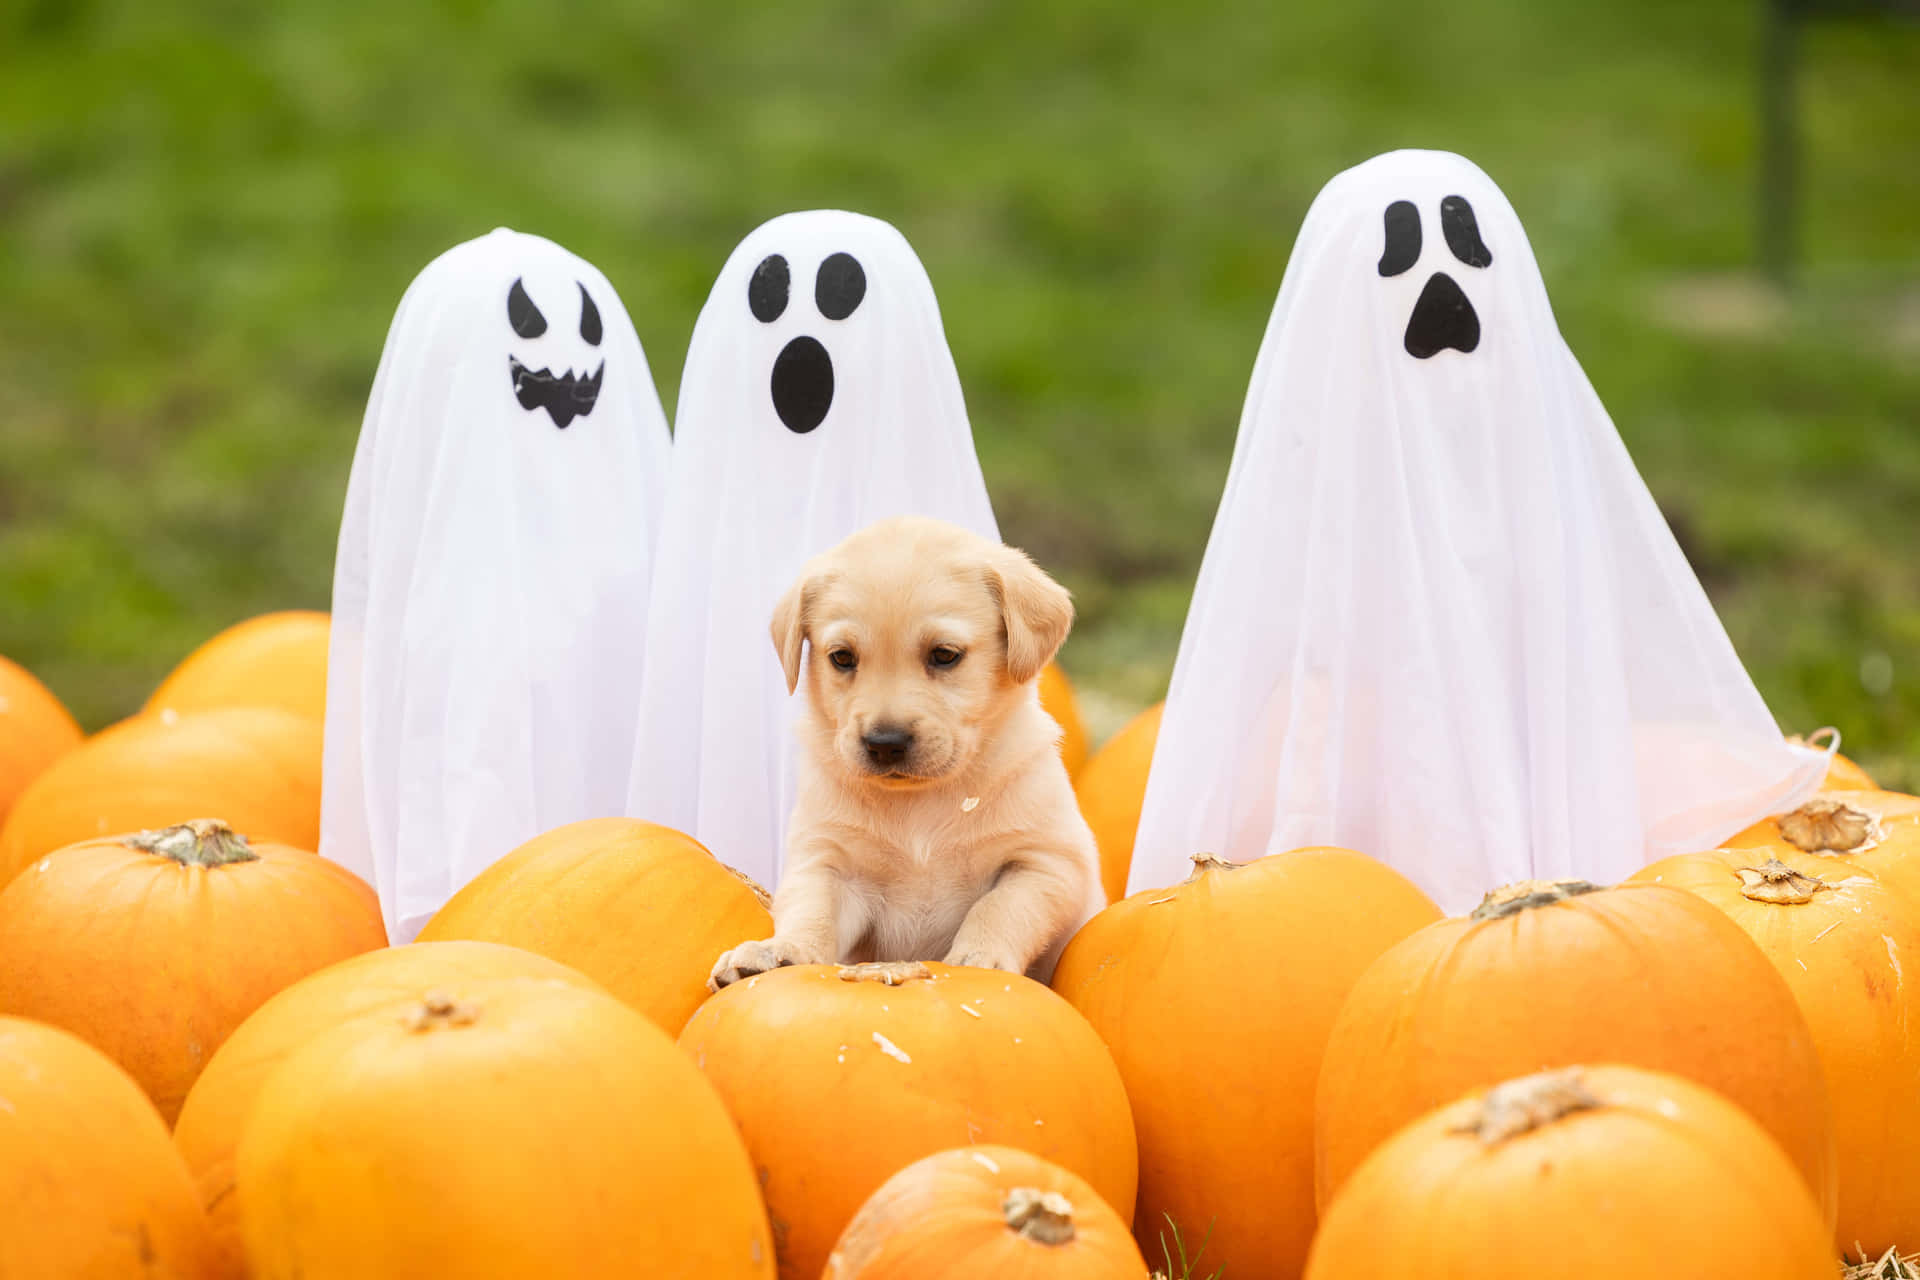 Halloween Puppy With Ghost Figures And Pumpkins Wallpaper